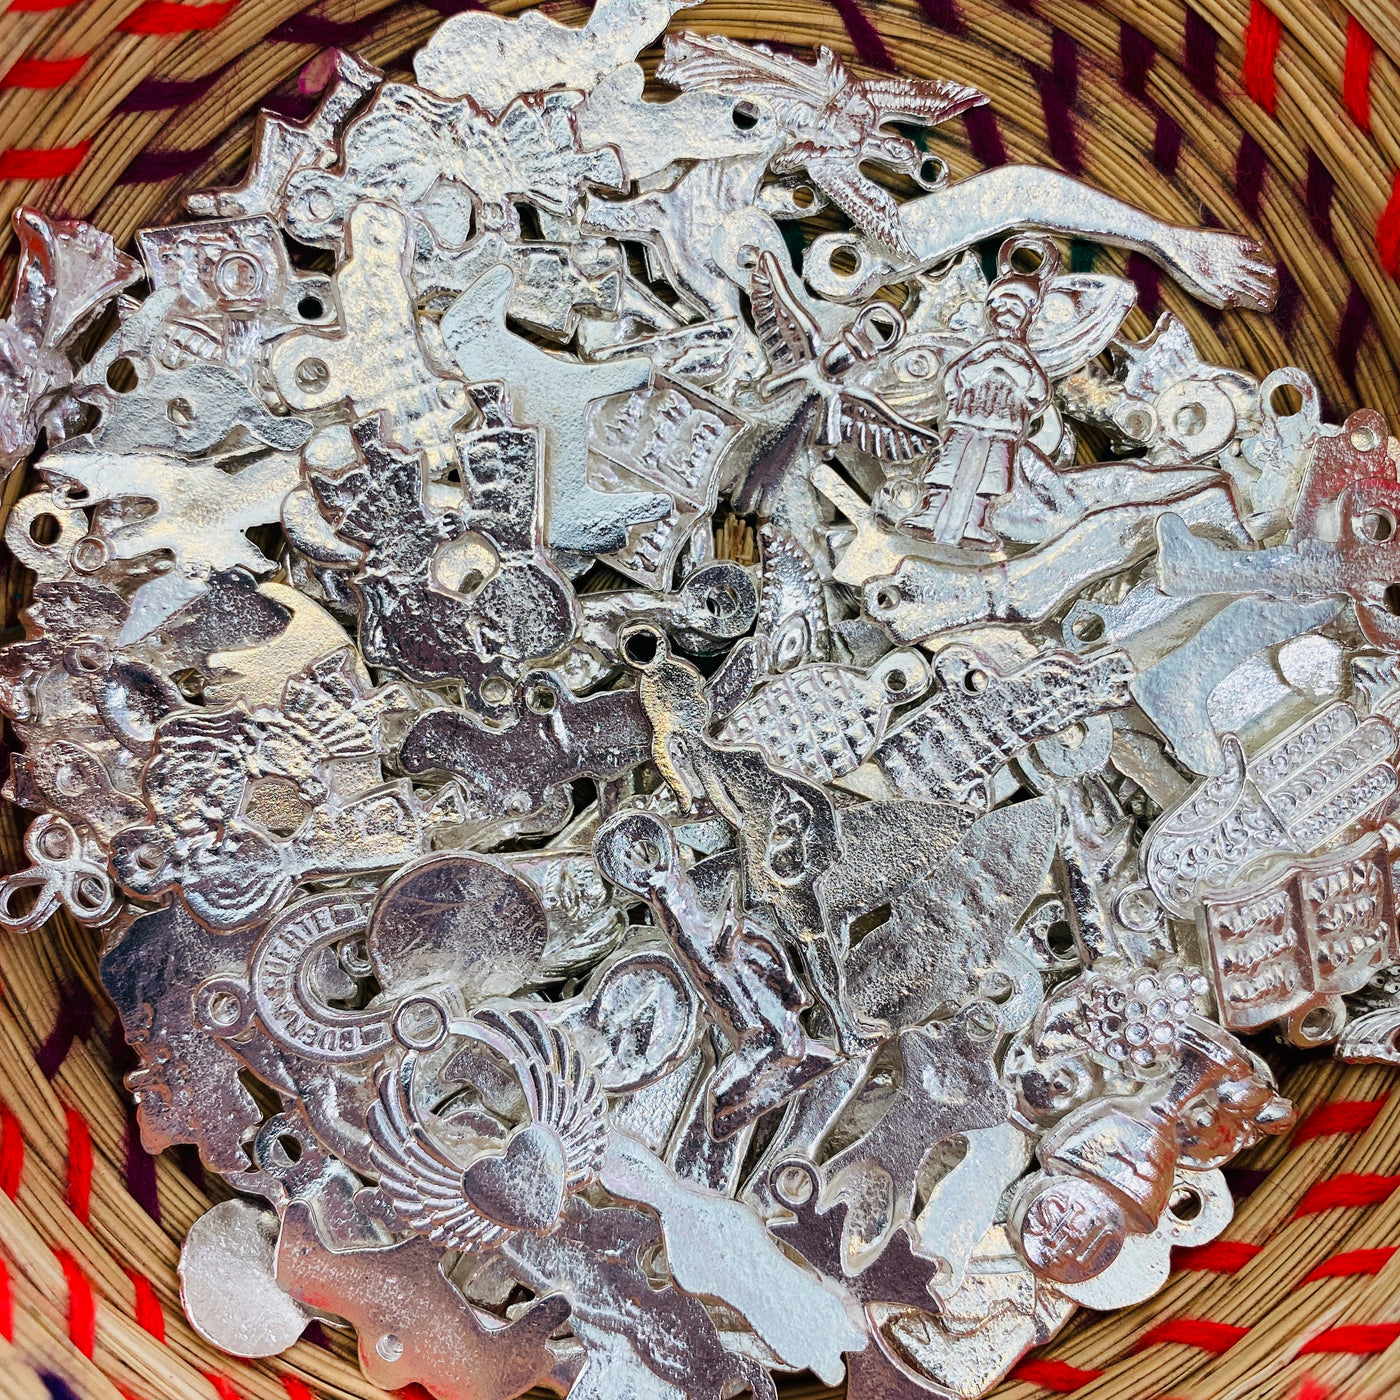 Close up of milagros (miracles) charms in basket.